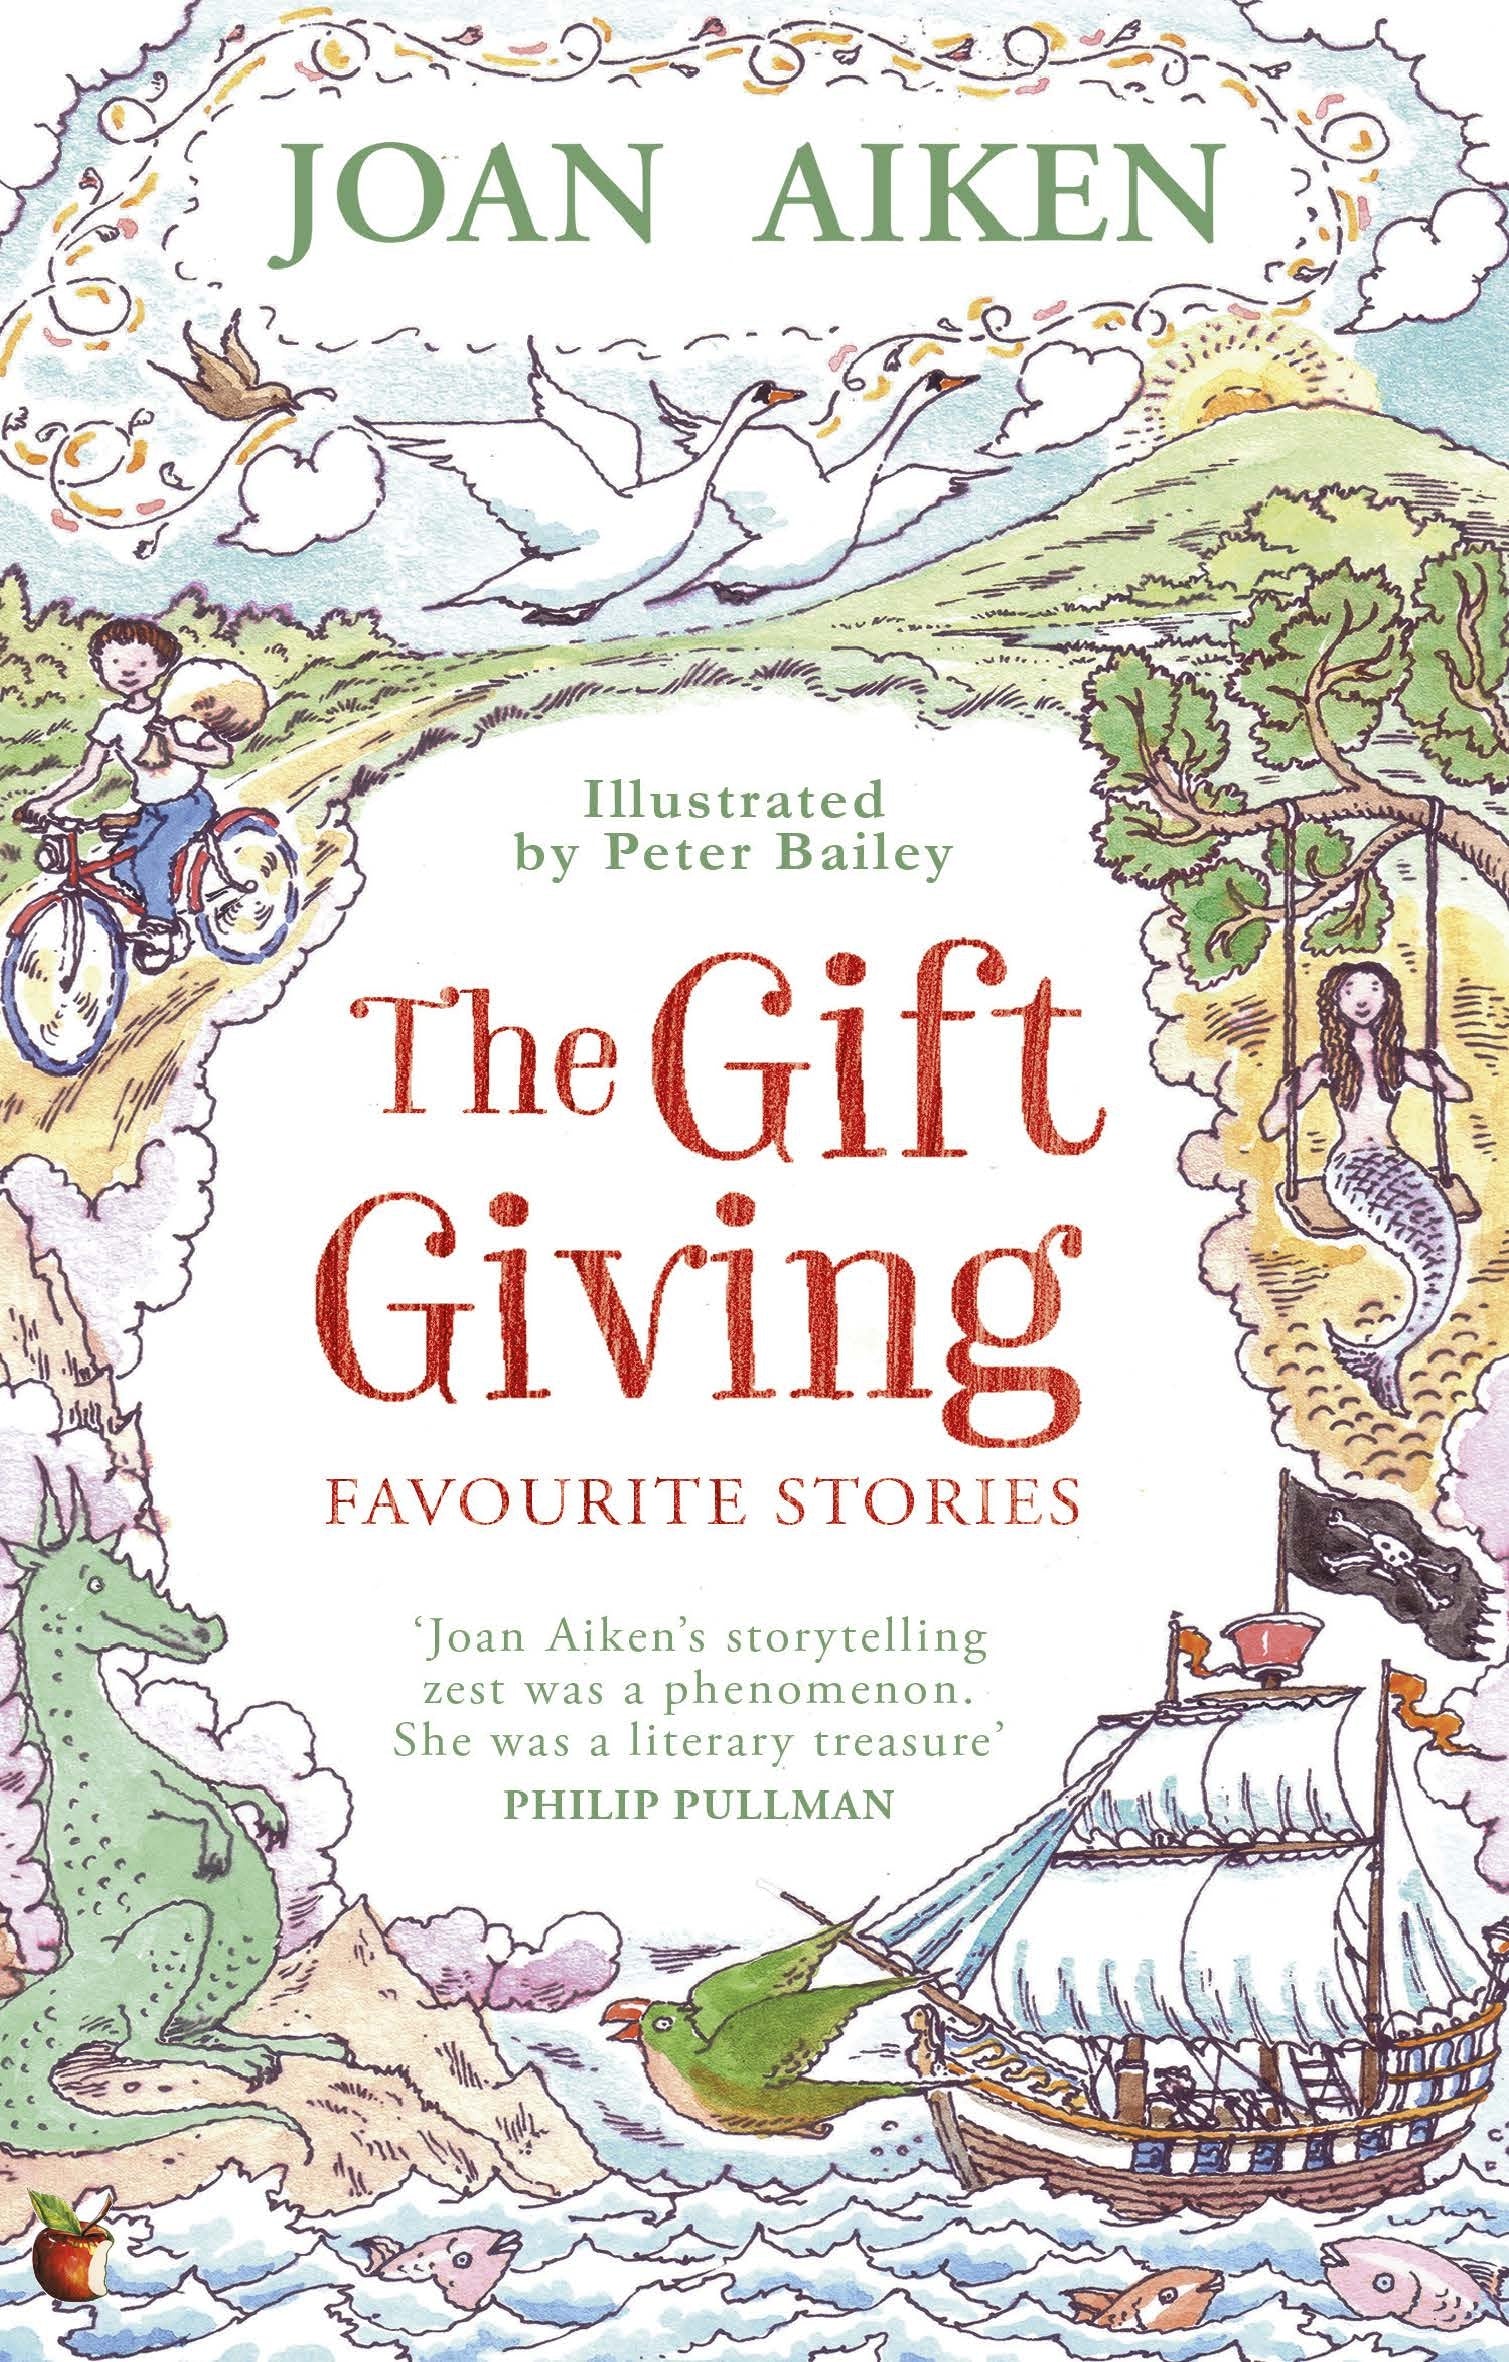 The Gift Giving: Favourite Stories by Joan Aiken, Peter Bailey